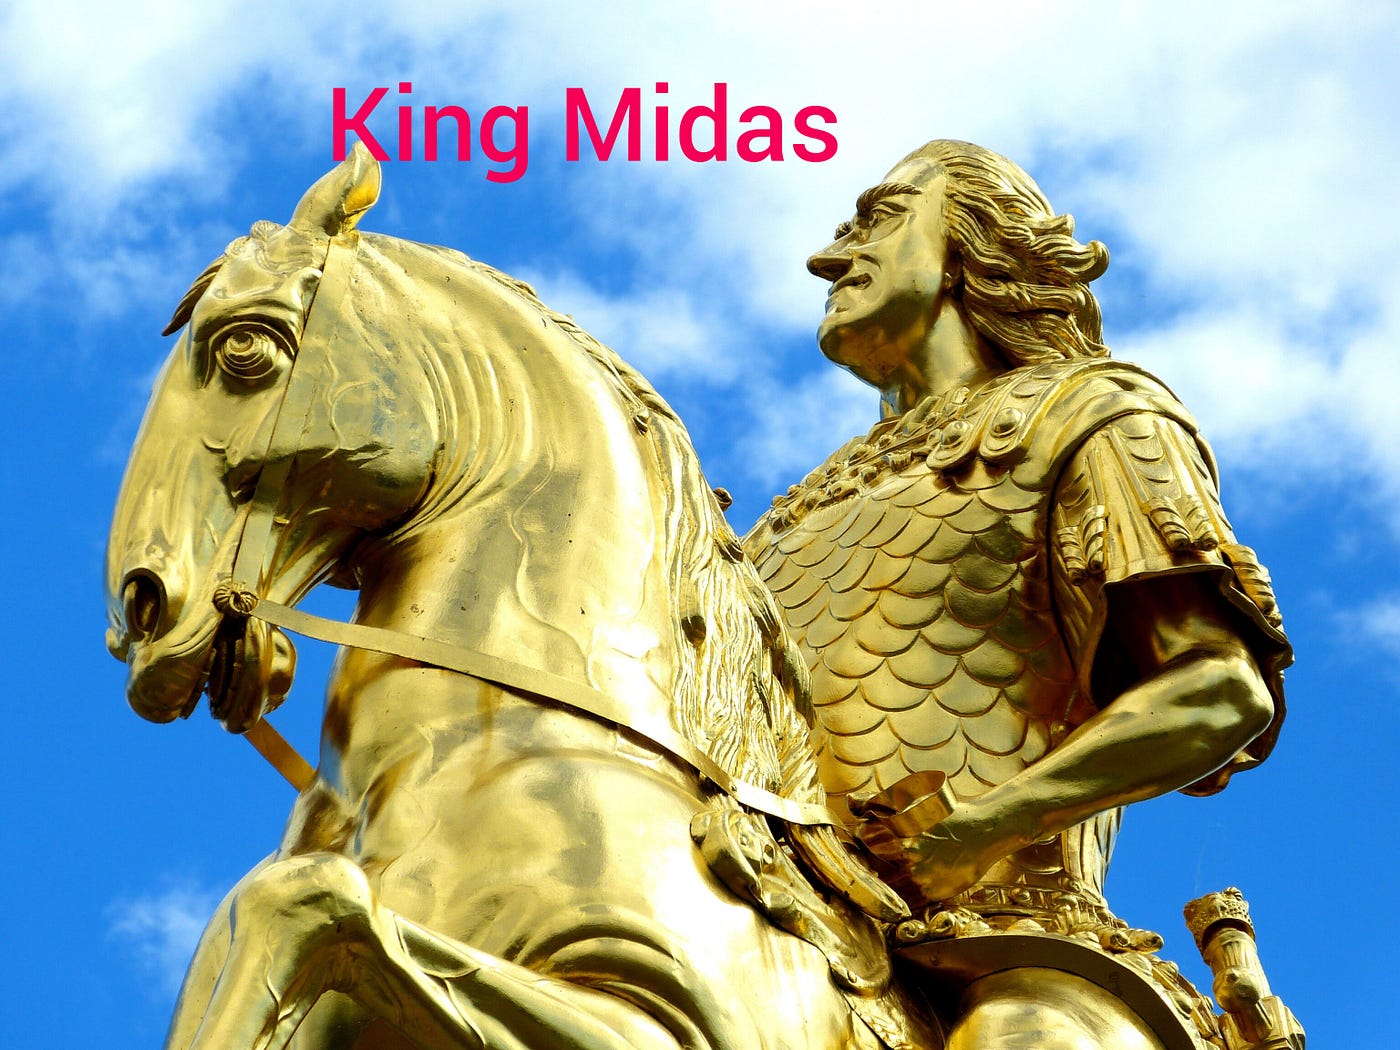 The Story of King Midas. To have “A Midas Touch” - Meaning